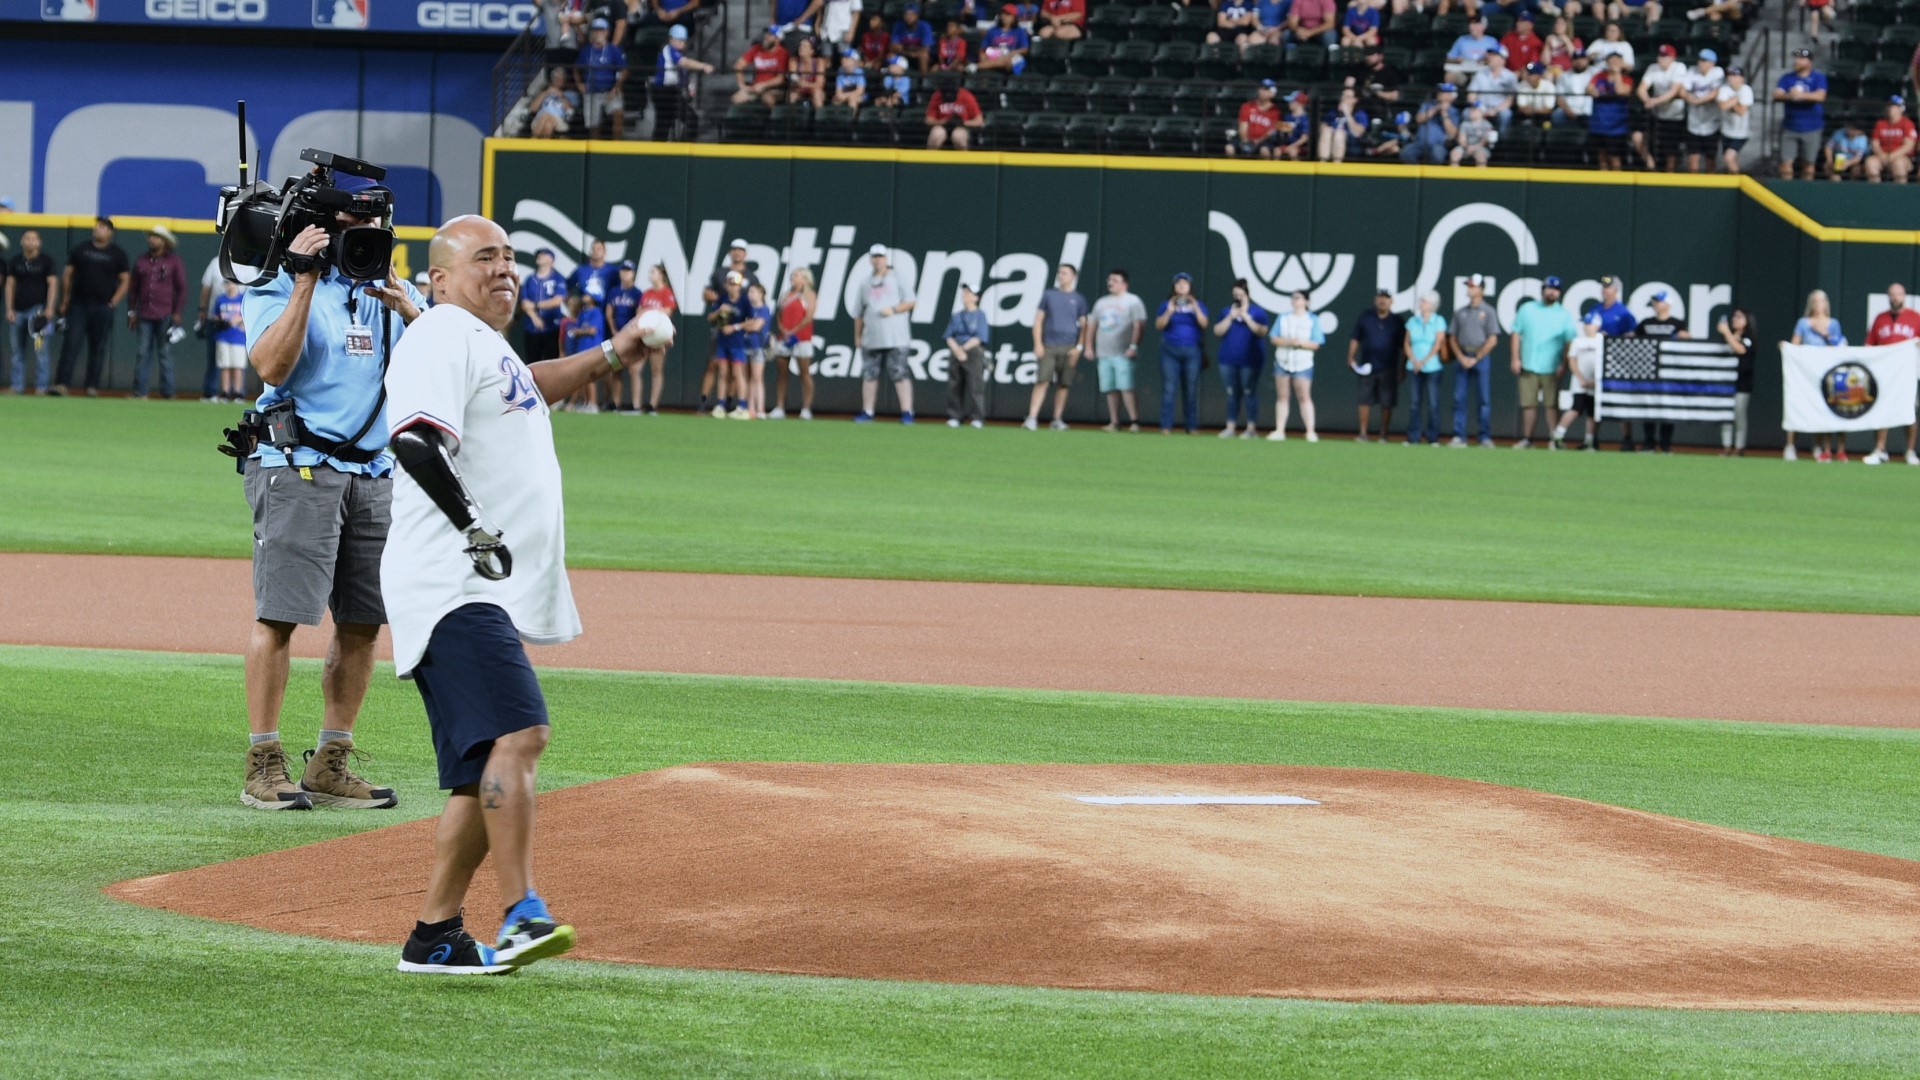 Comal County sheriff's deputy Eddy Luna threw out the ceremonial first pitch on First Responders Appreciation Night at the ballpark.